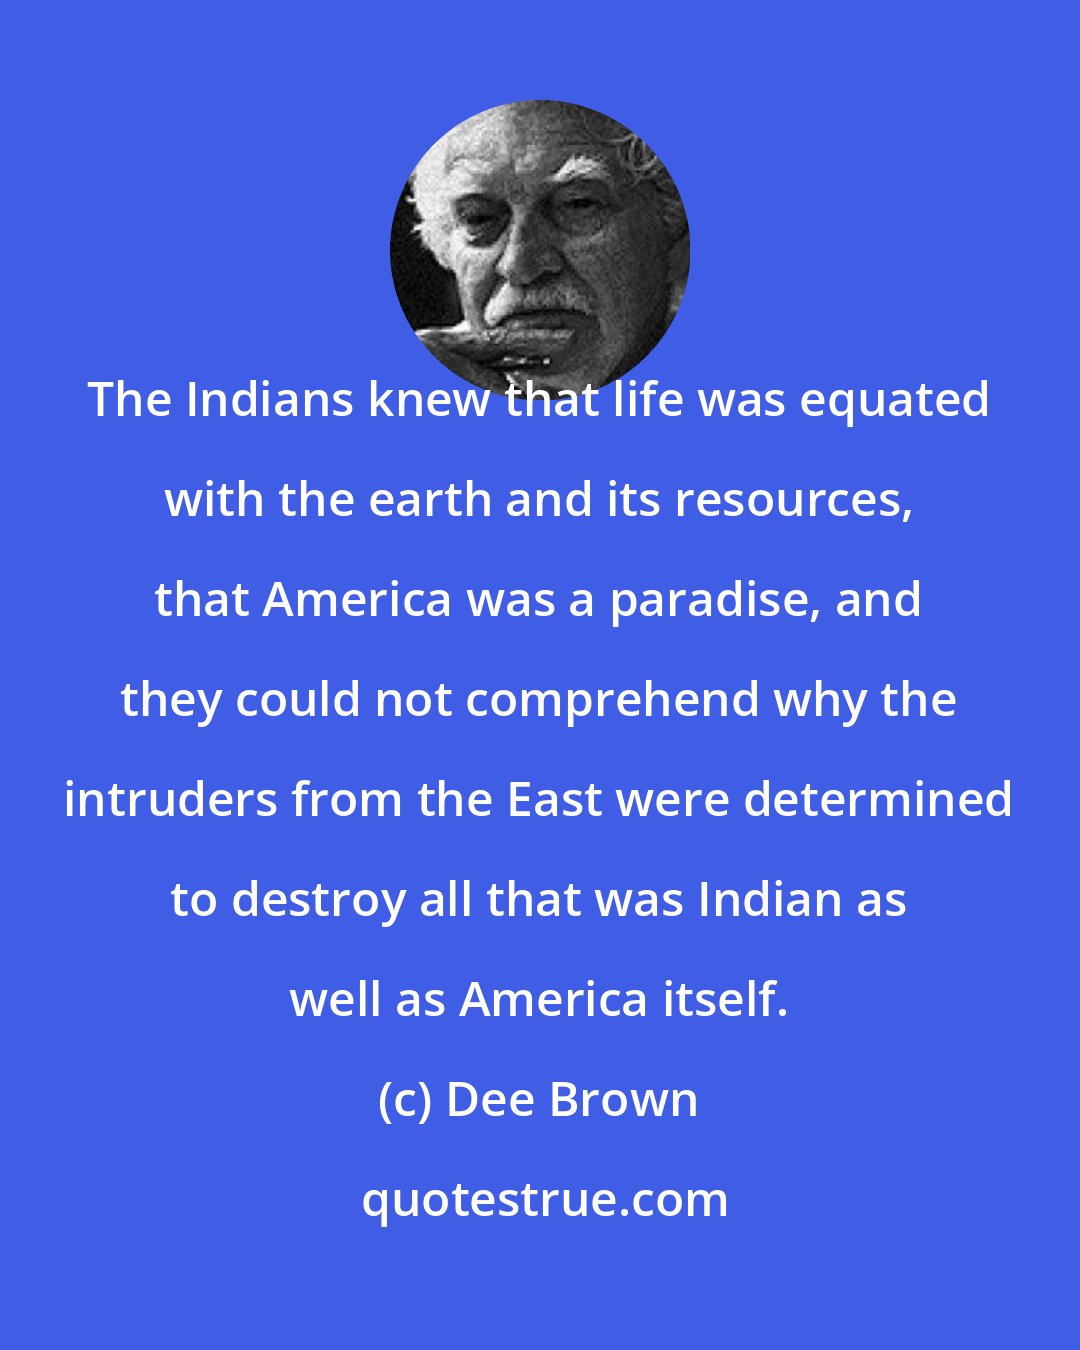 Dee Brown: The Indians knew that life was equated with the earth and its resources, that America was a paradise, and they could not comprehend why the intruders from the East were determined to destroy all that was Indian as well as America itself.